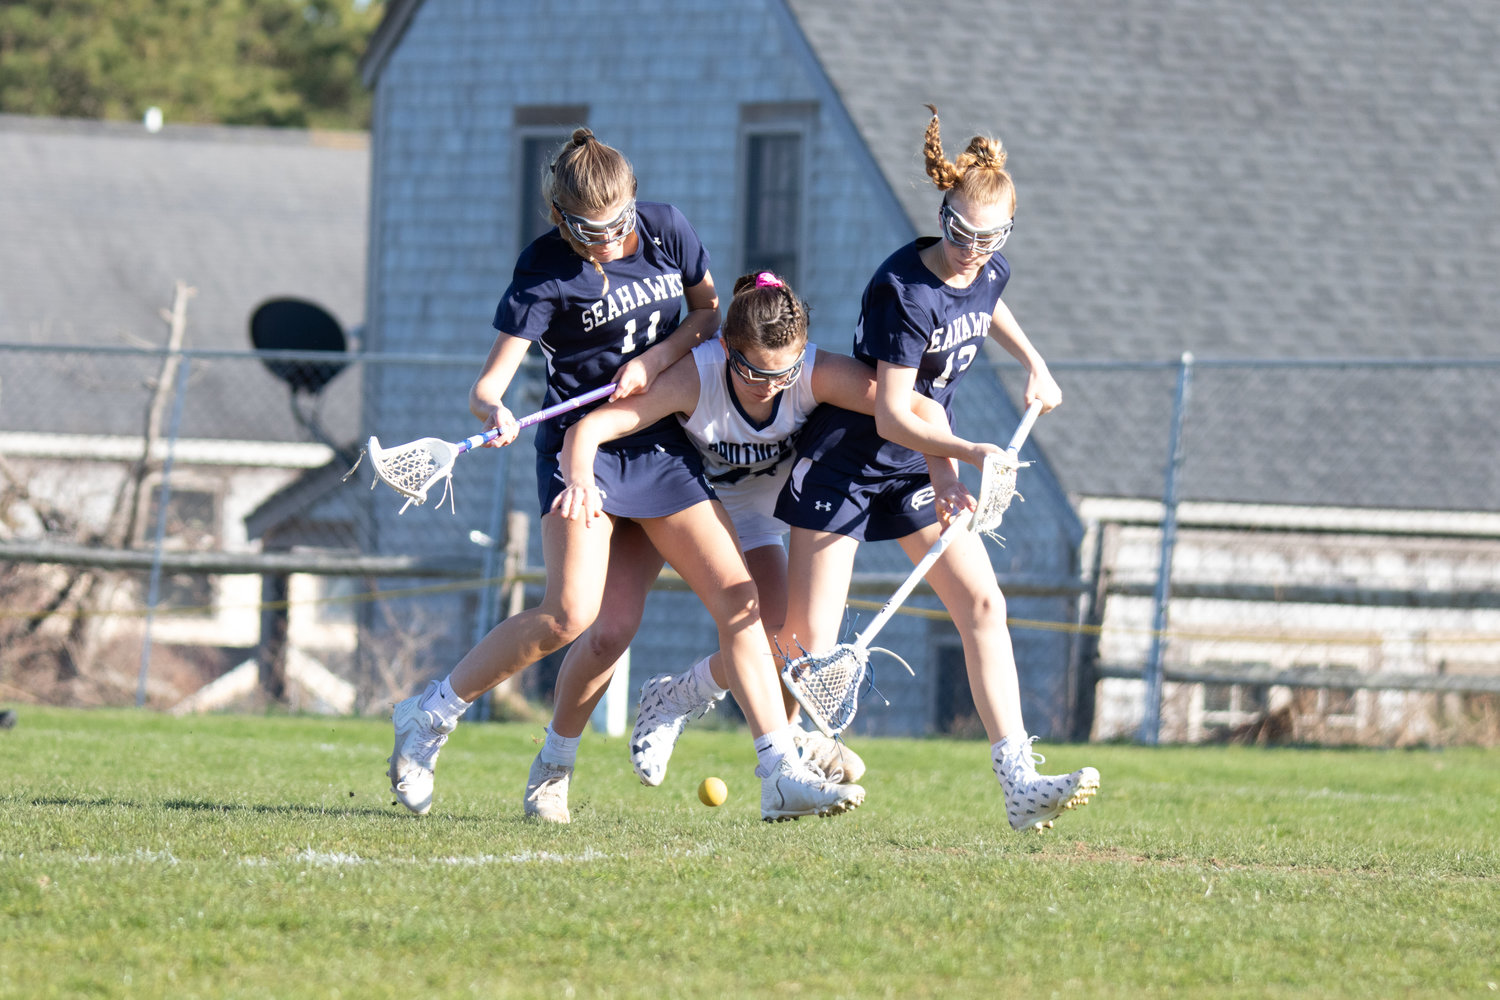 Hannah Evens splits a pair of CCA players in a battle for the ball. The Whalers won the game 18-11.